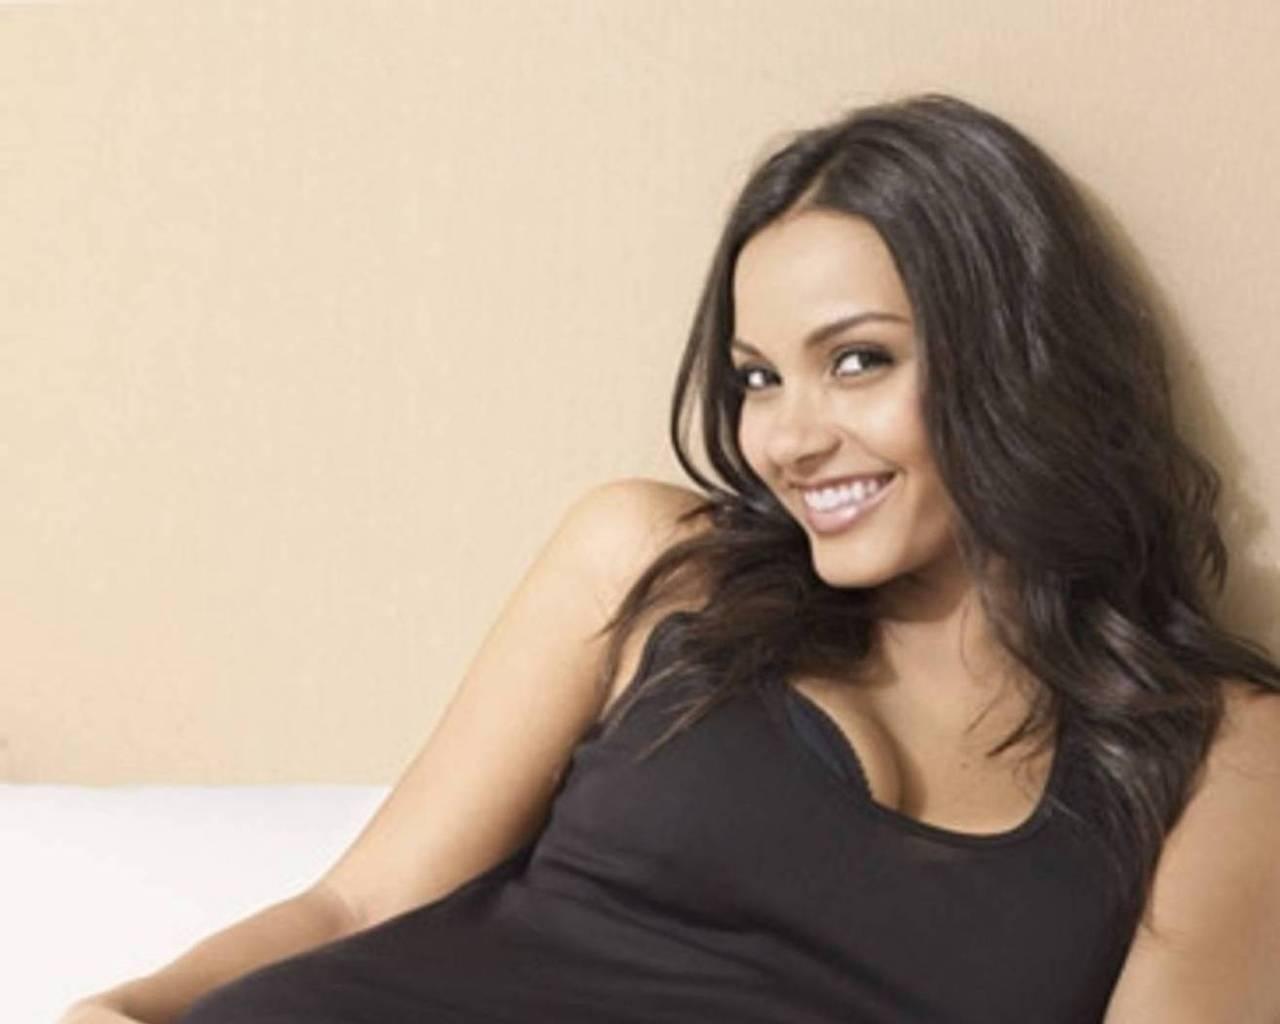 Jessica Lucas Wallpaper Photo Shared By Aldo11 Fans Share Image